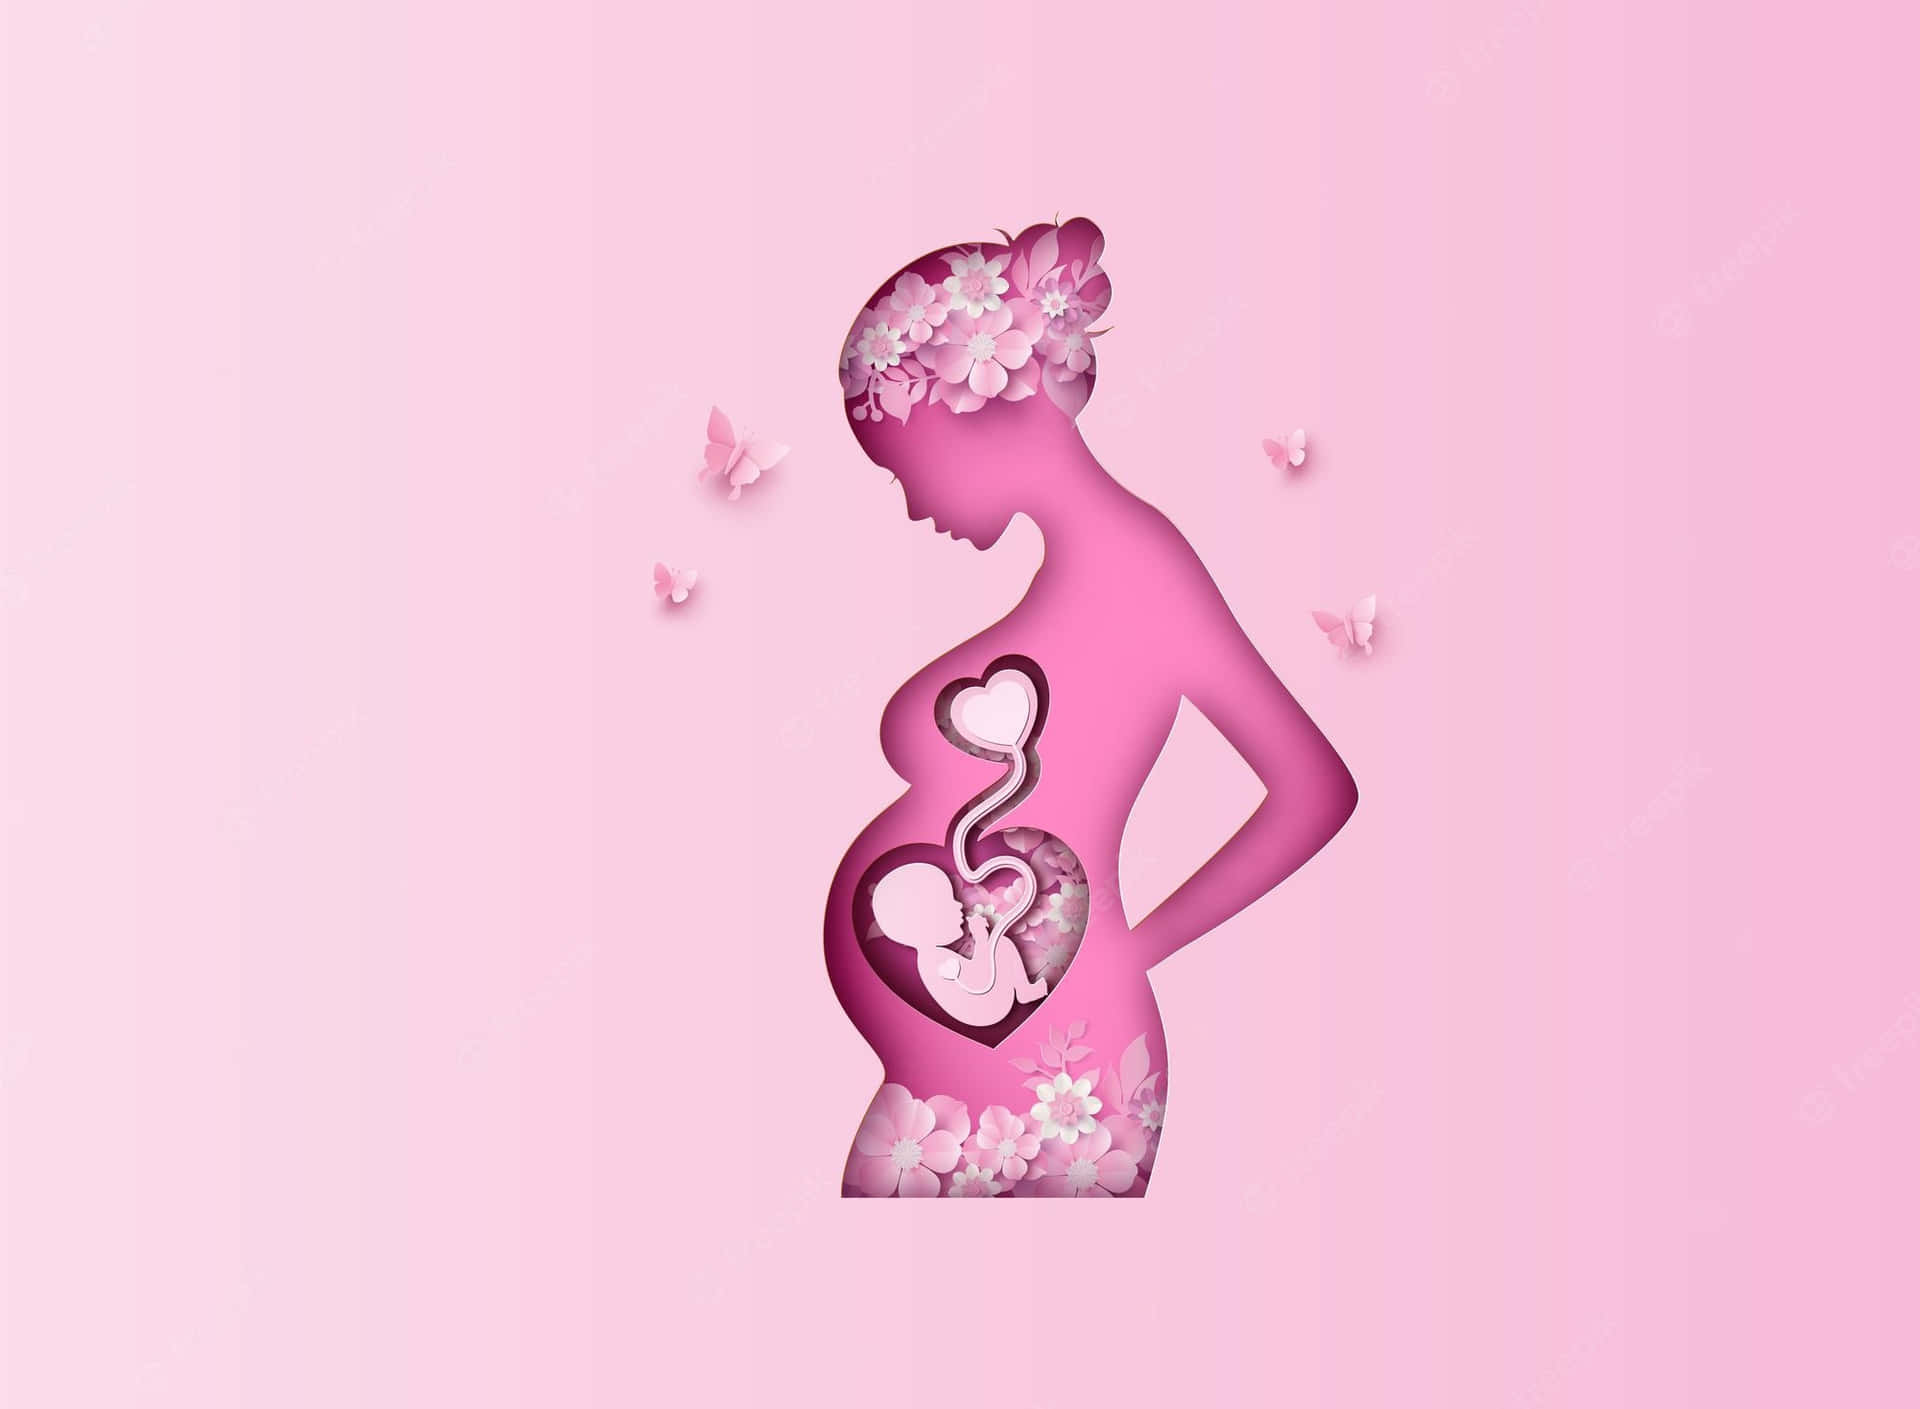 Pregnant Woman Baby And Heart Wallpaper